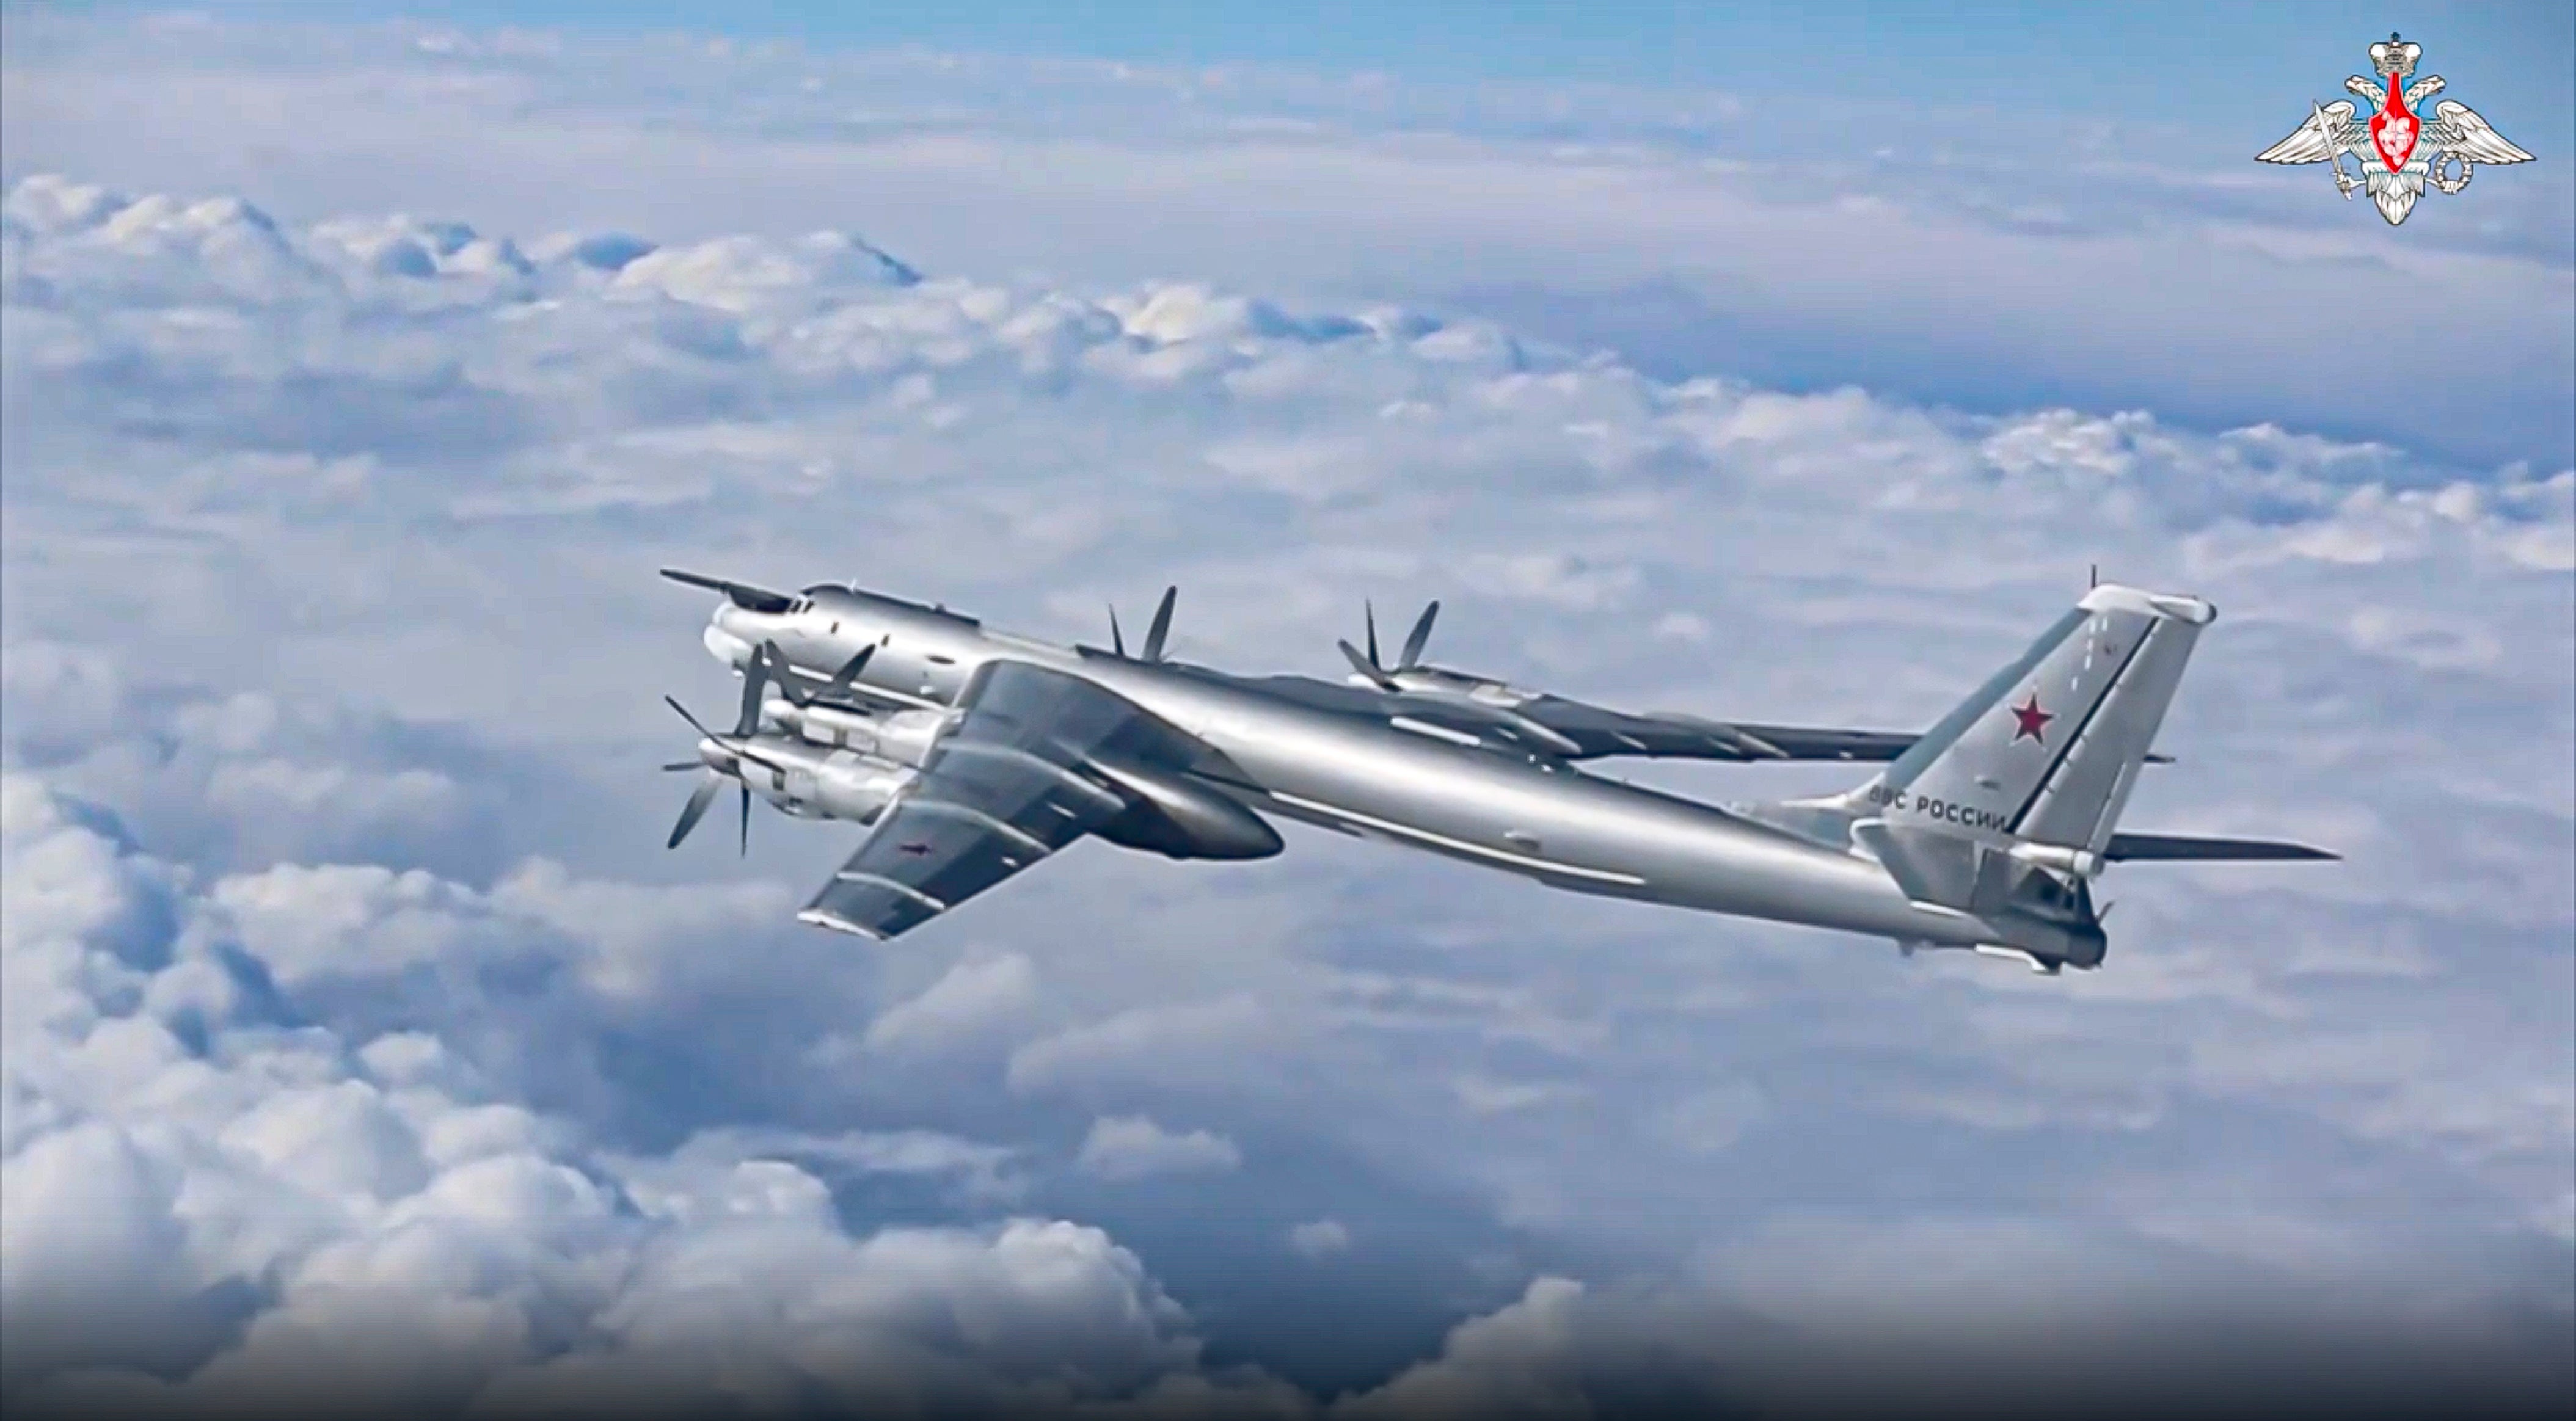 The Engels air base is believed to be home to more than a dozen of Russia’s Tu-95 strategic bombers